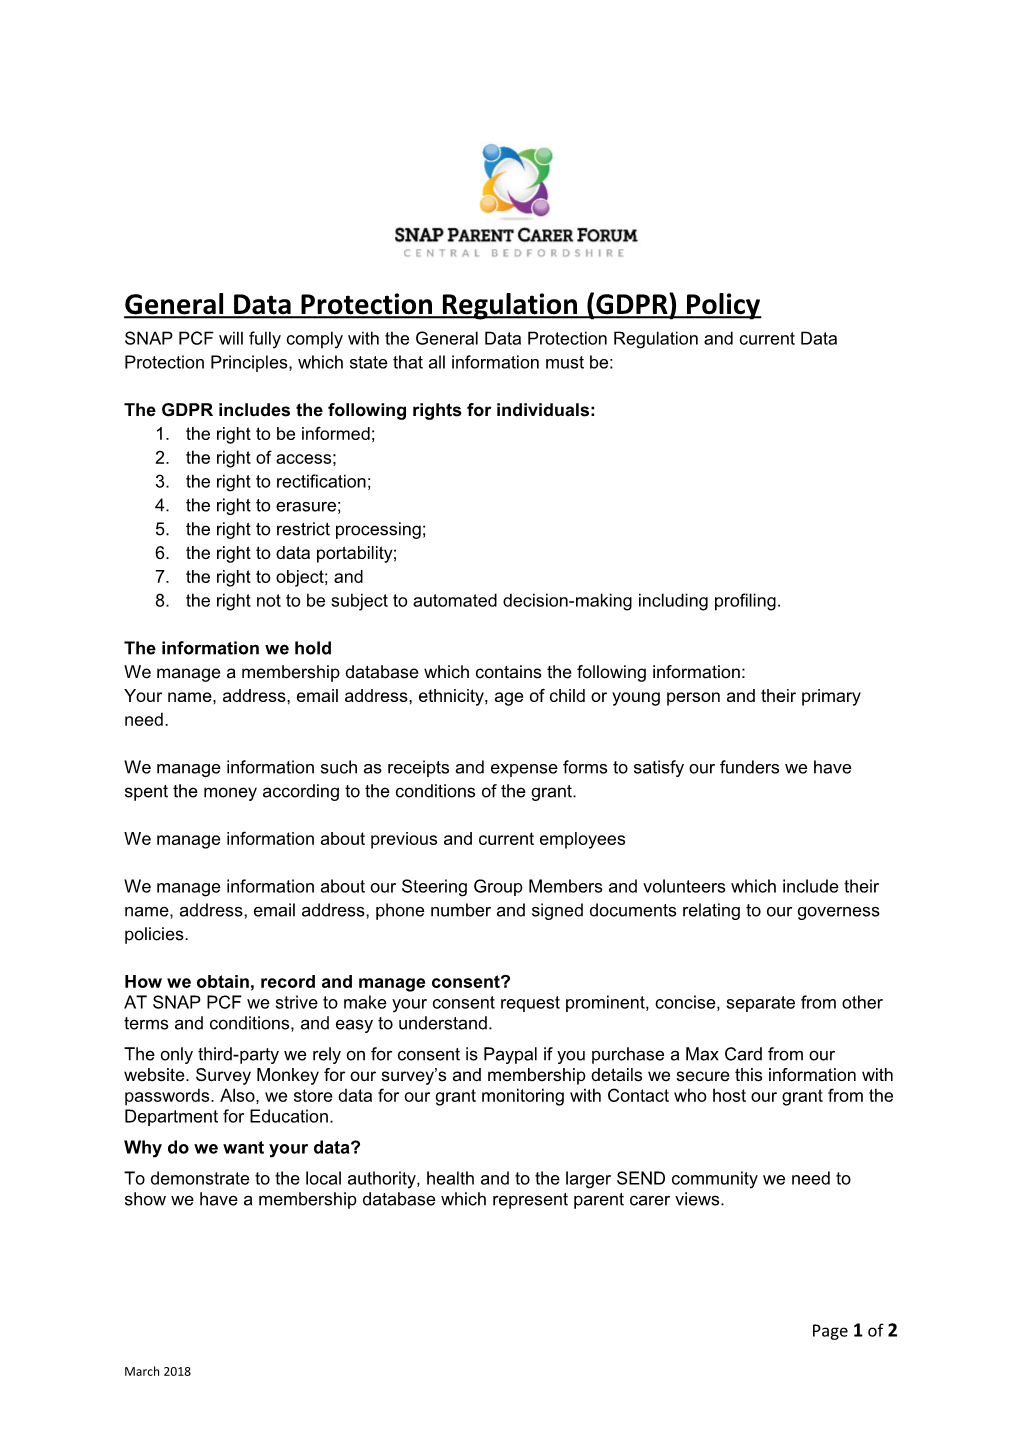 General Data Protection Regulation (GDPR) Policy